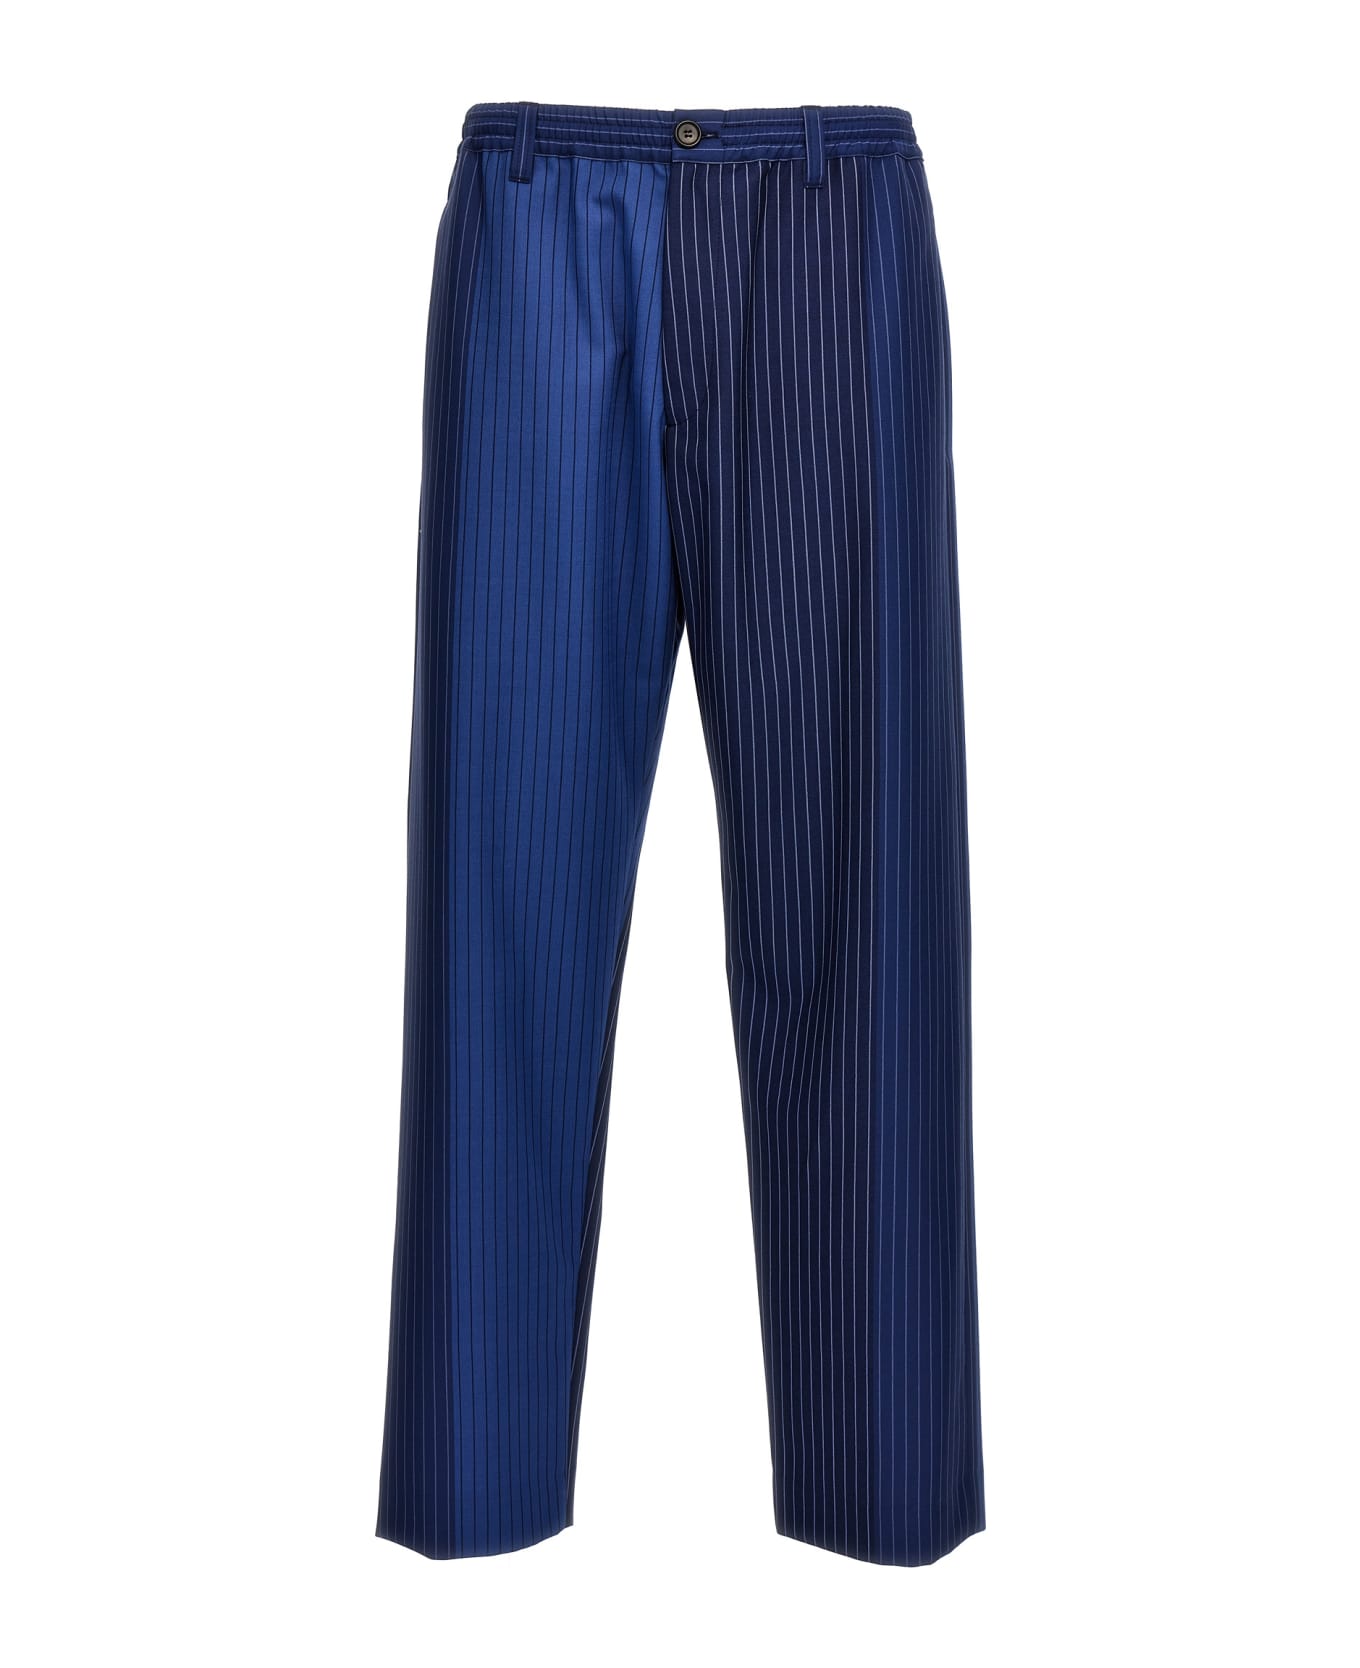 Marni Striped Trousers - Blue ボトムス